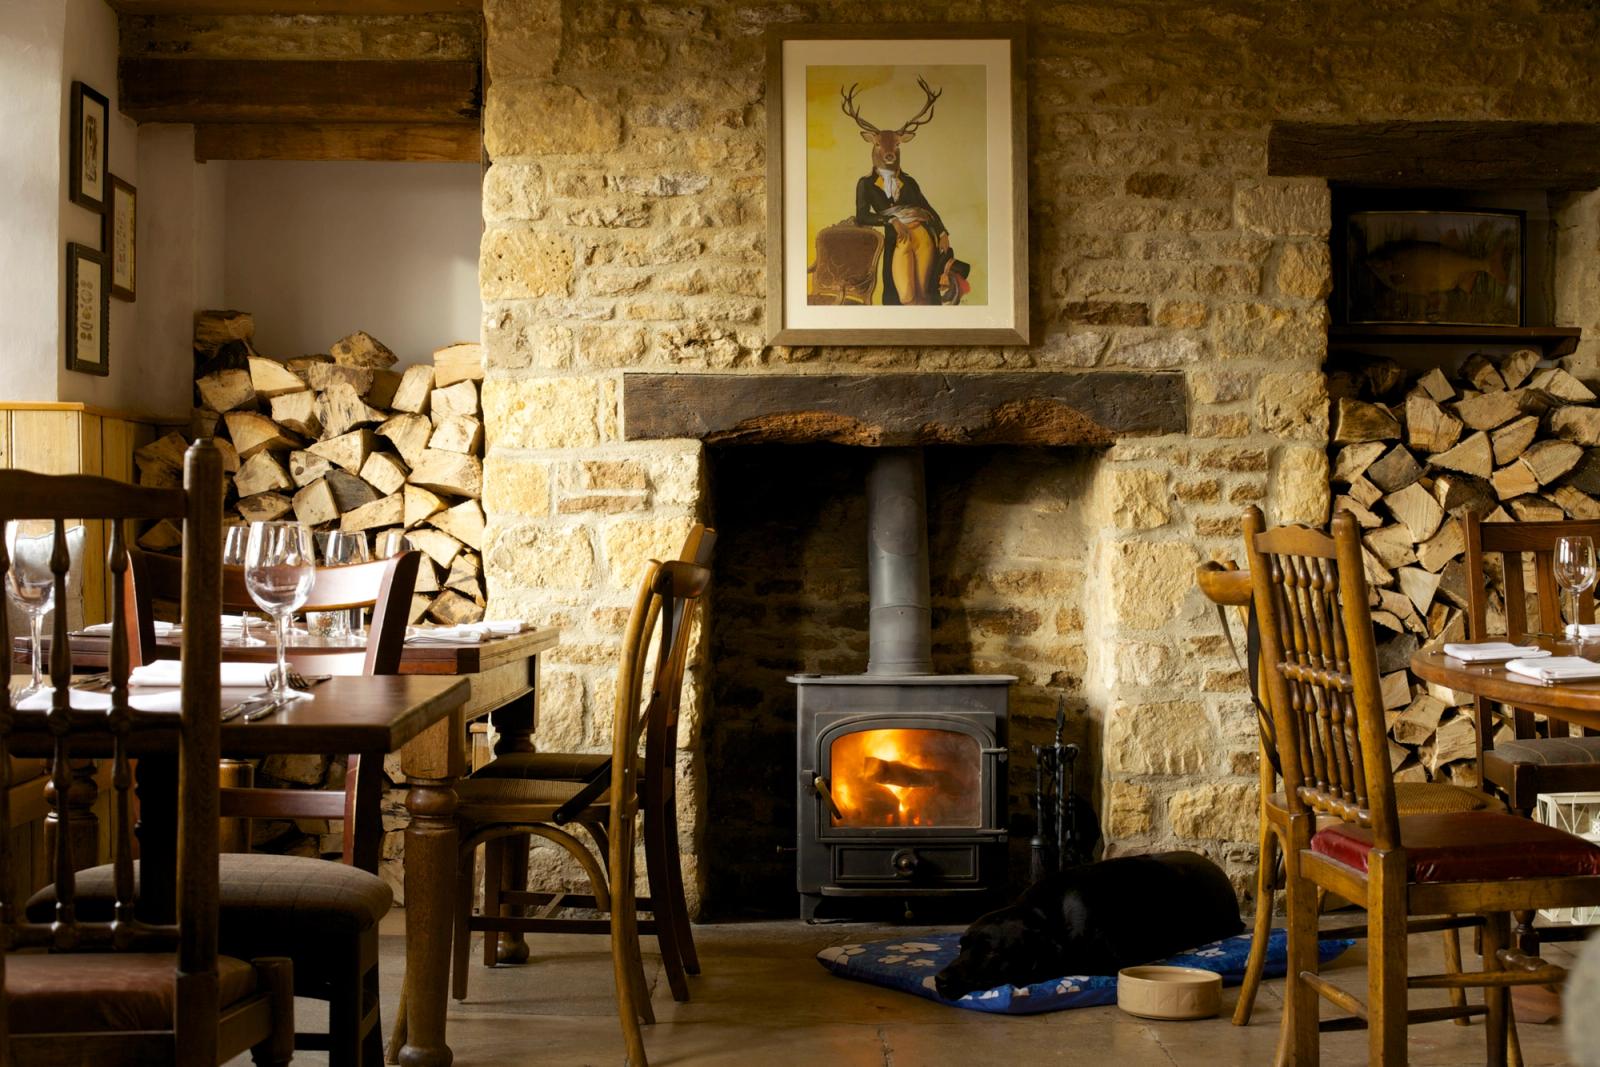 Best gastro pubs with rooms in Cotswolds